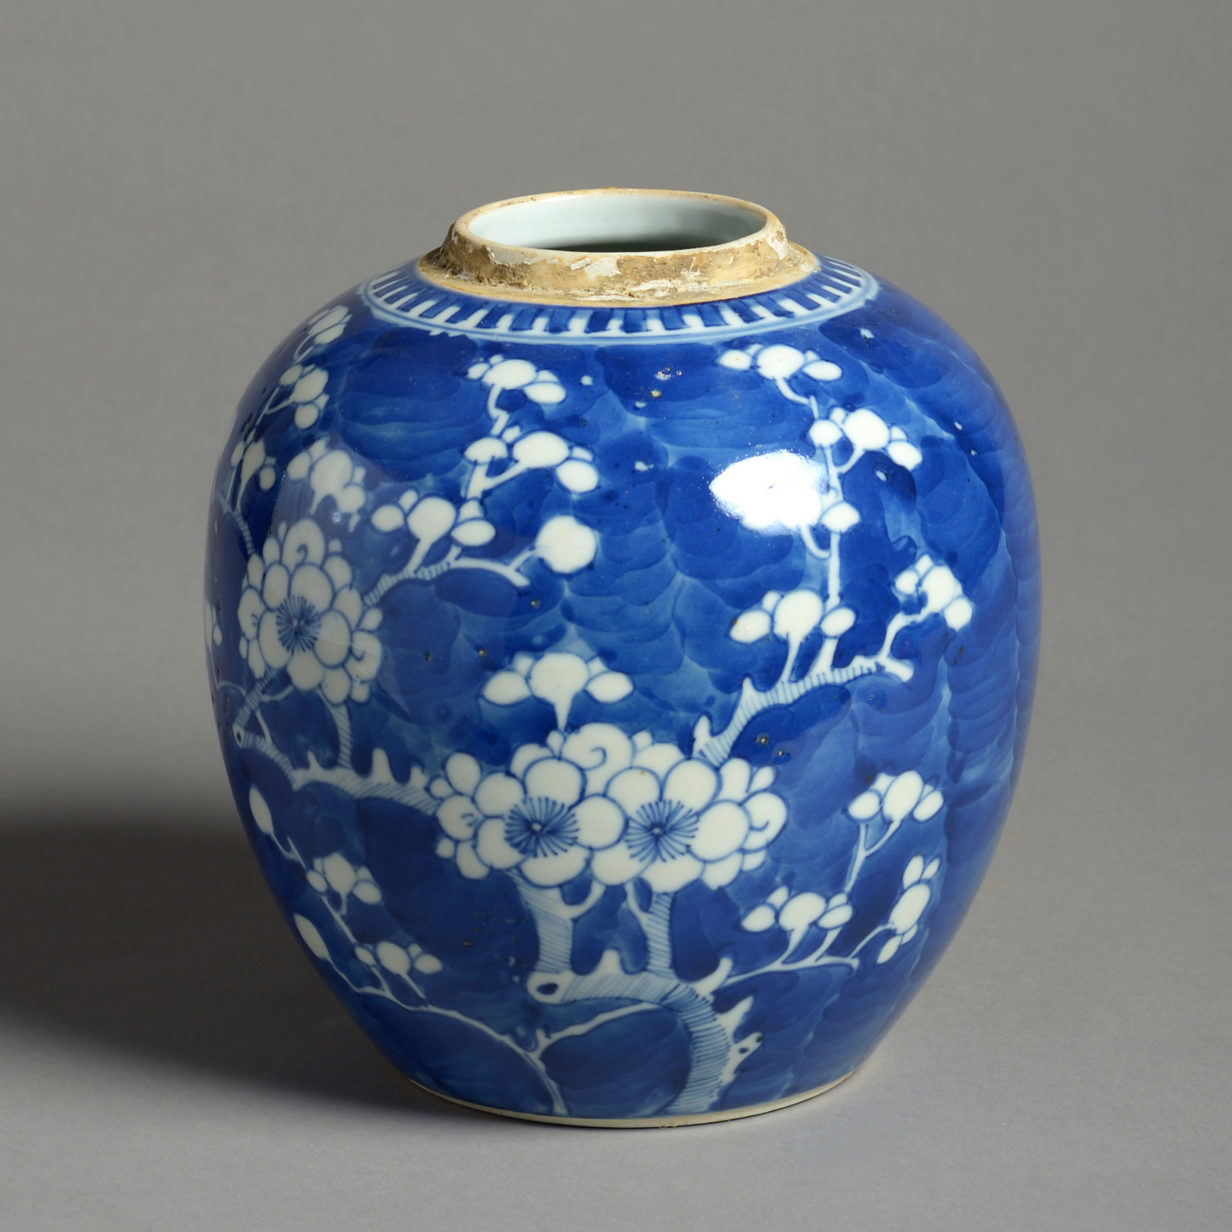 A 19th century blue and white porcelain jar